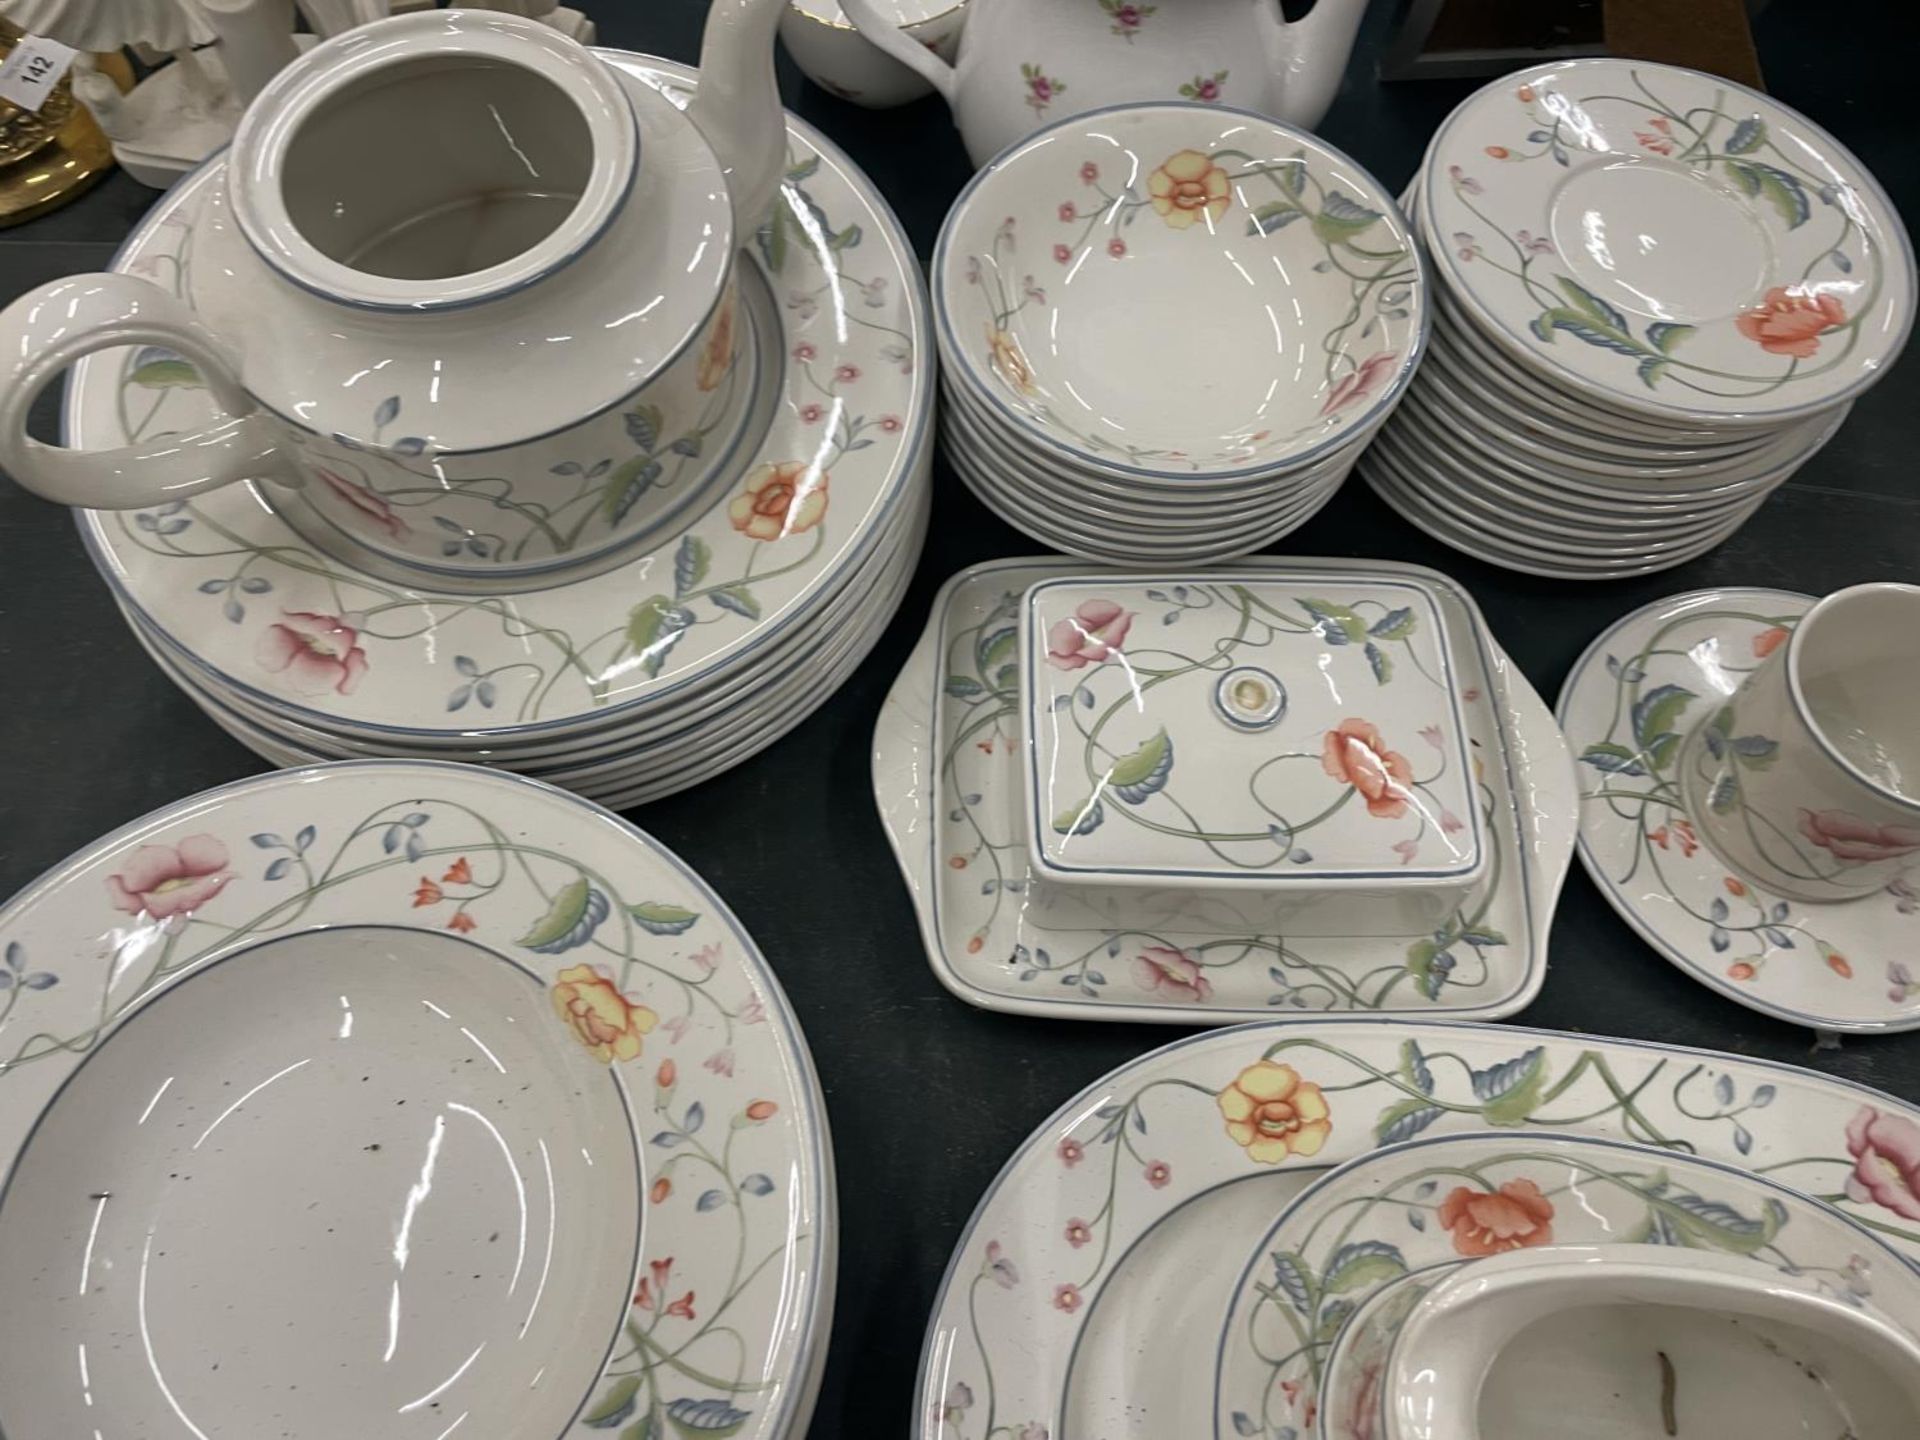 VARIOUS VILLEROY AND BOSH ALBERTINA DINNERWARE ITEMS TO INCLUDE BOWLS, PLATES, DISHES, FORKS, - Image 4 of 8